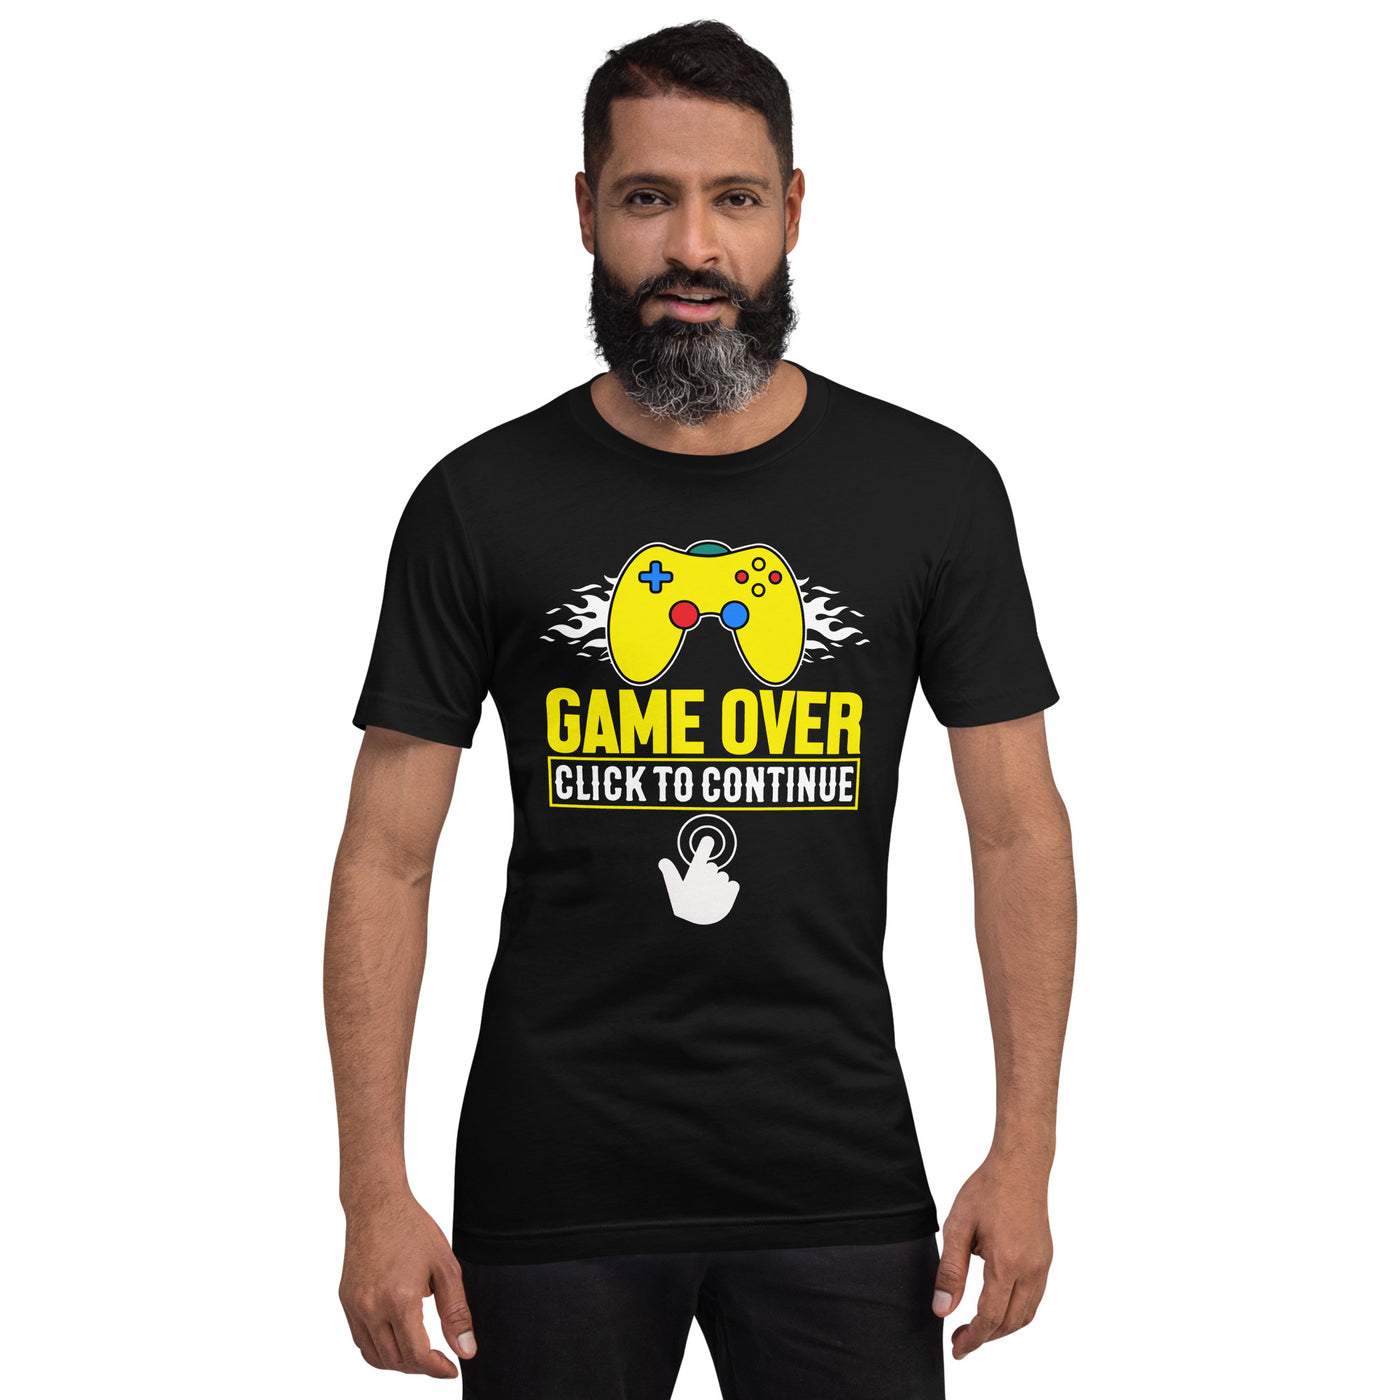 Game Over Click to Continue - Unisex t-shirt